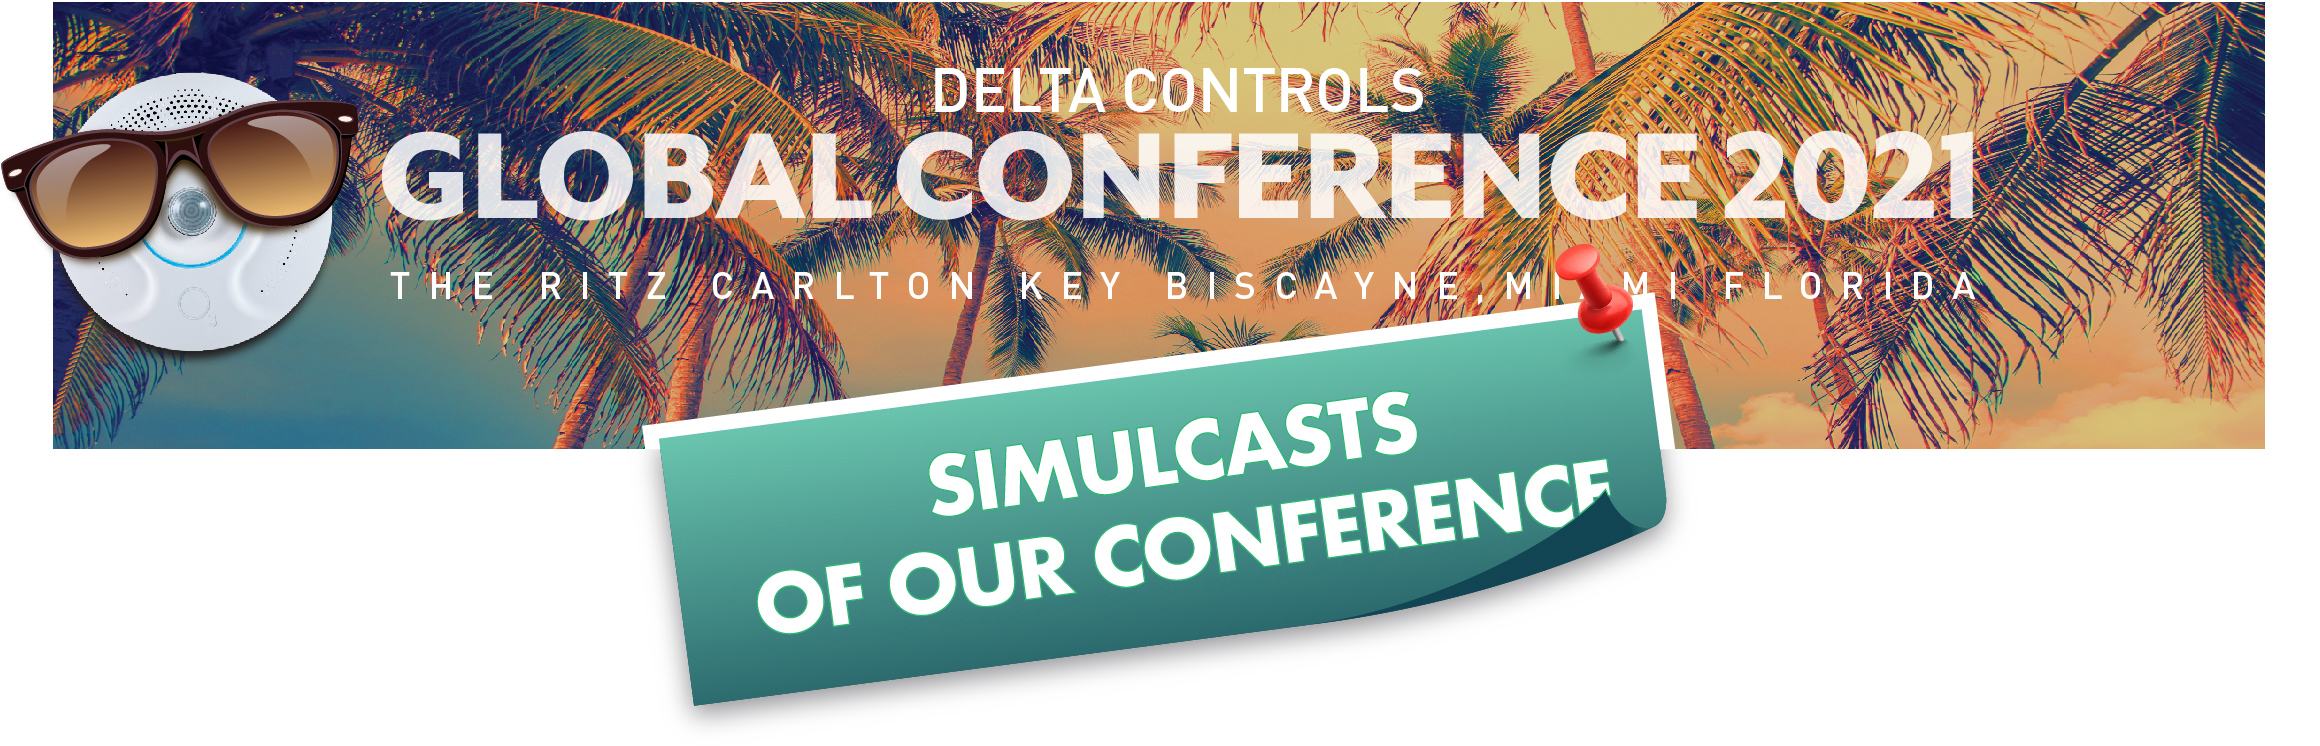 Global Conference 2021 Simulcasts — Delta Controls